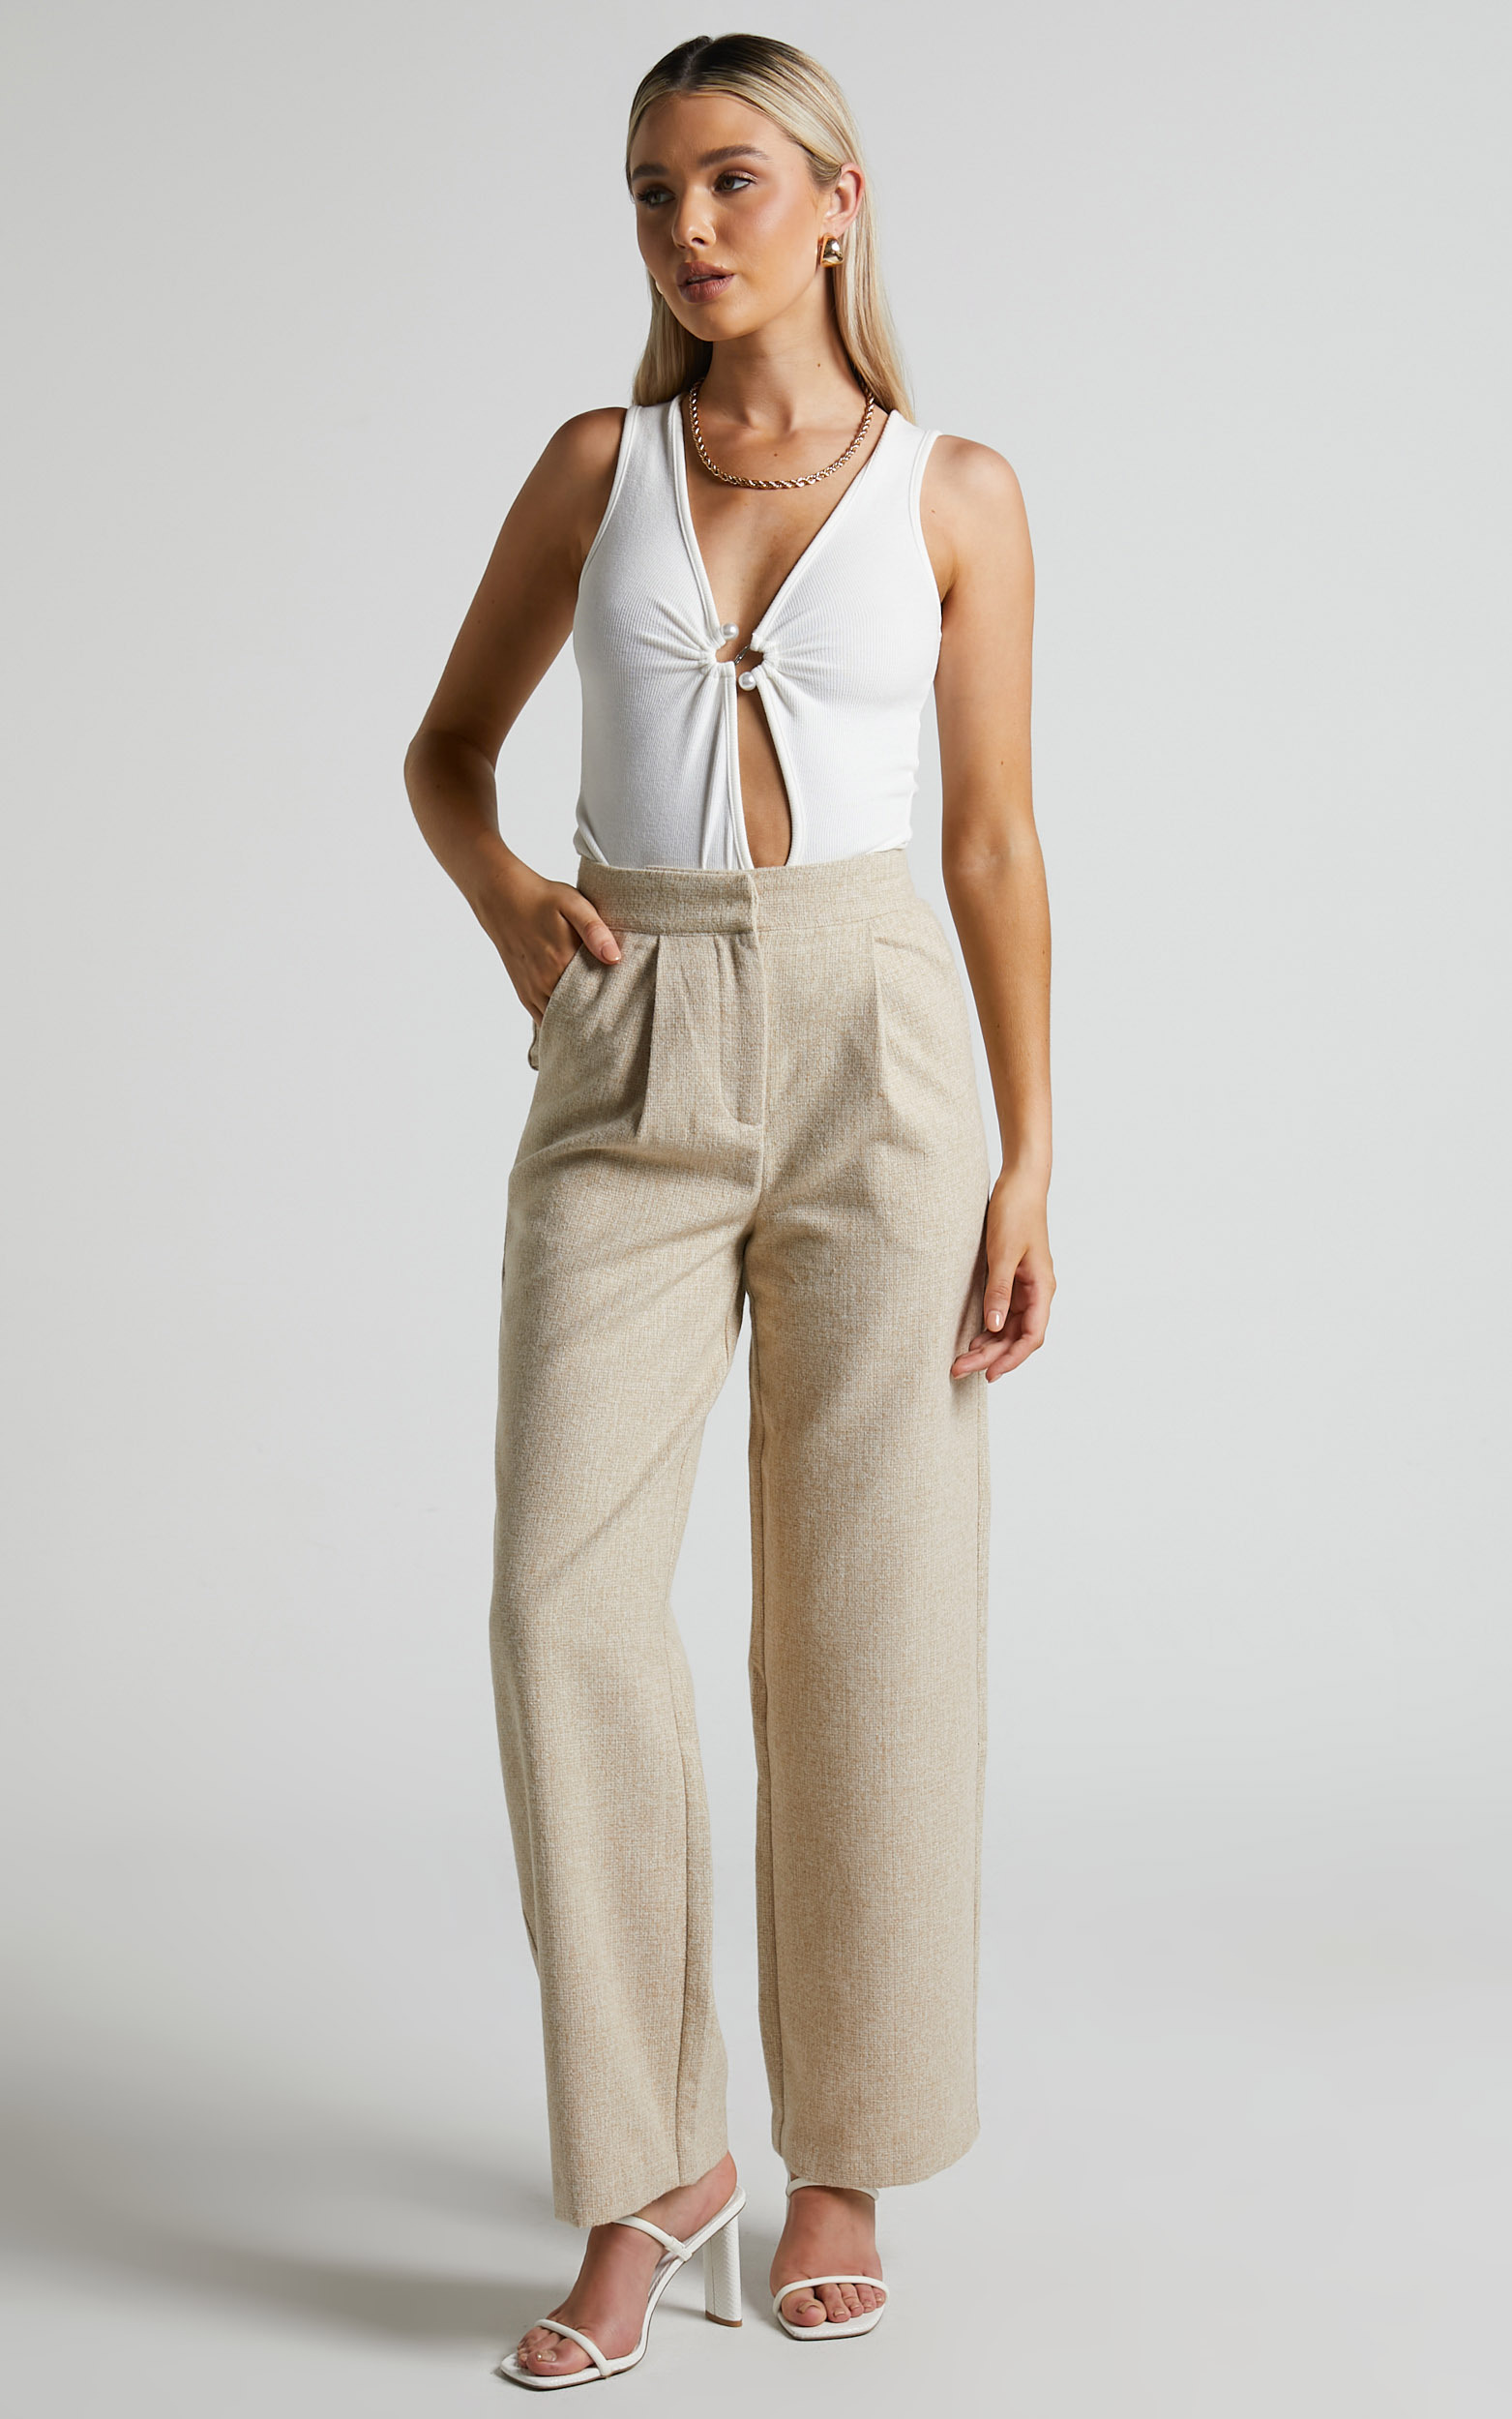 4Th & Reckless - BRADSHAW TROUSER in Beige - 06, BRN1, hi-res image number null